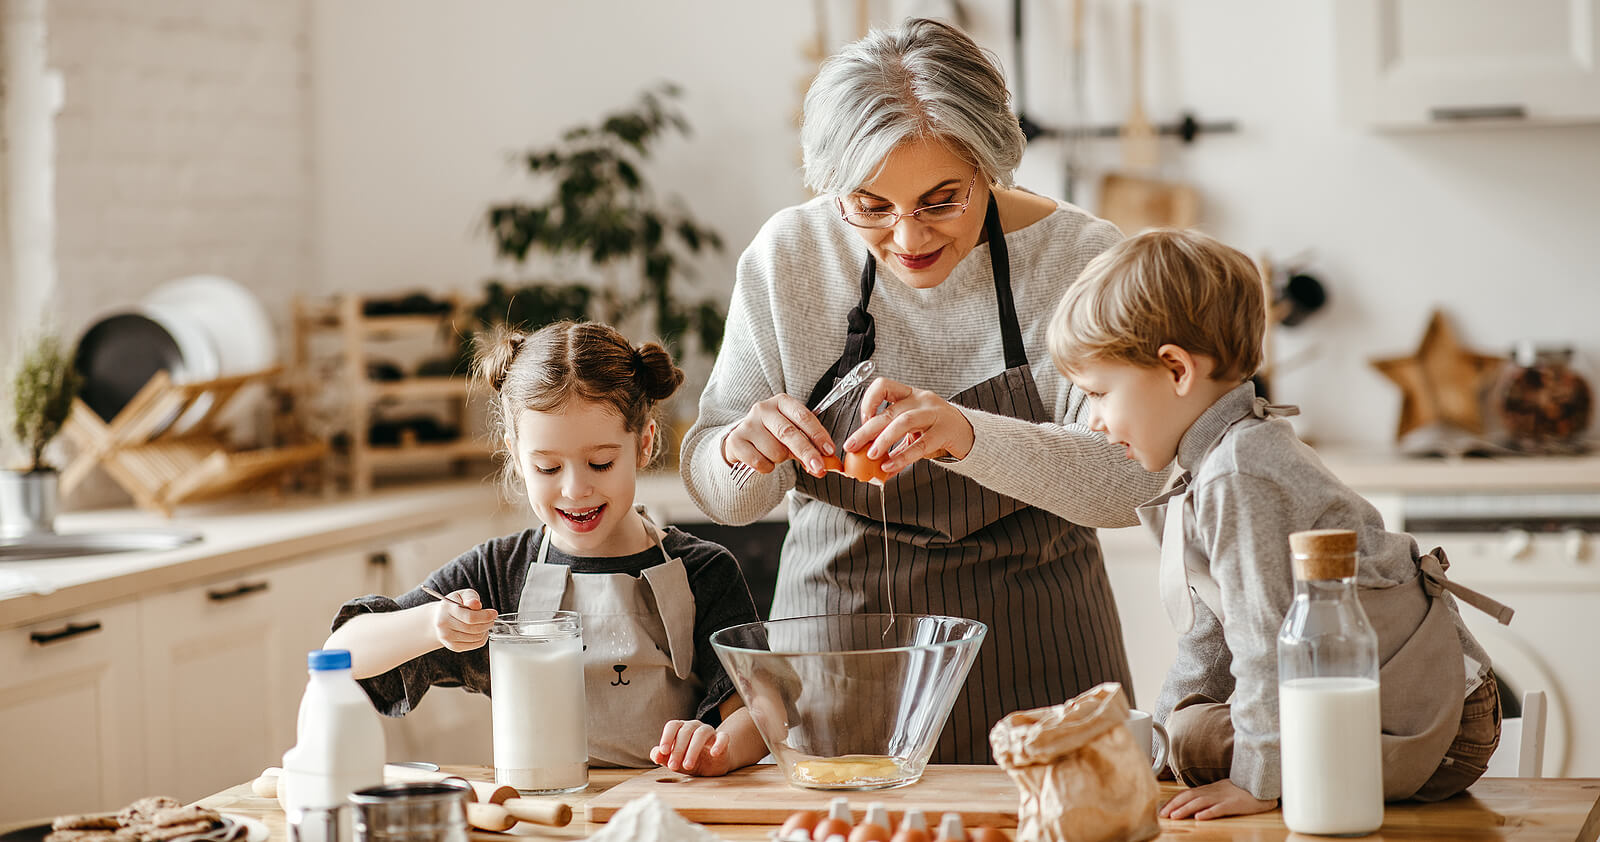 A grandmother baking with her grandkids.